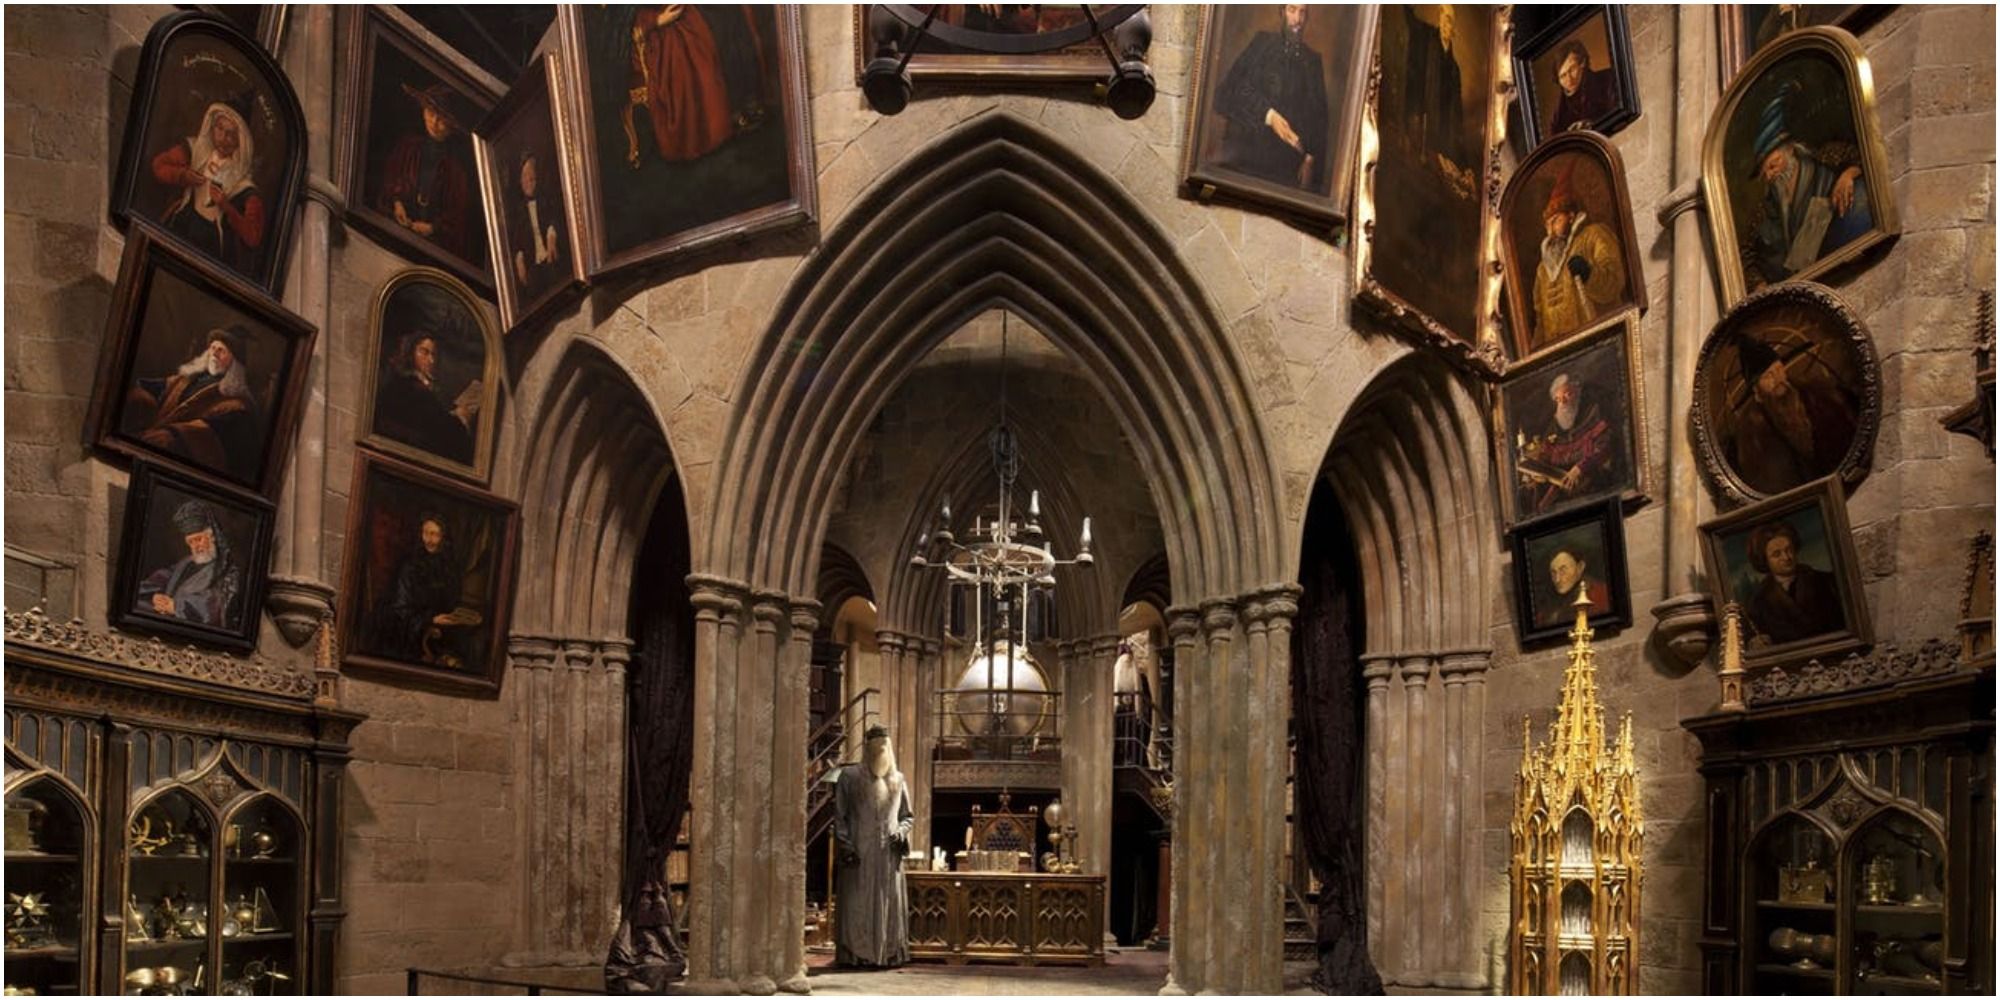 Albus Dumbledore's office from Harry Potter